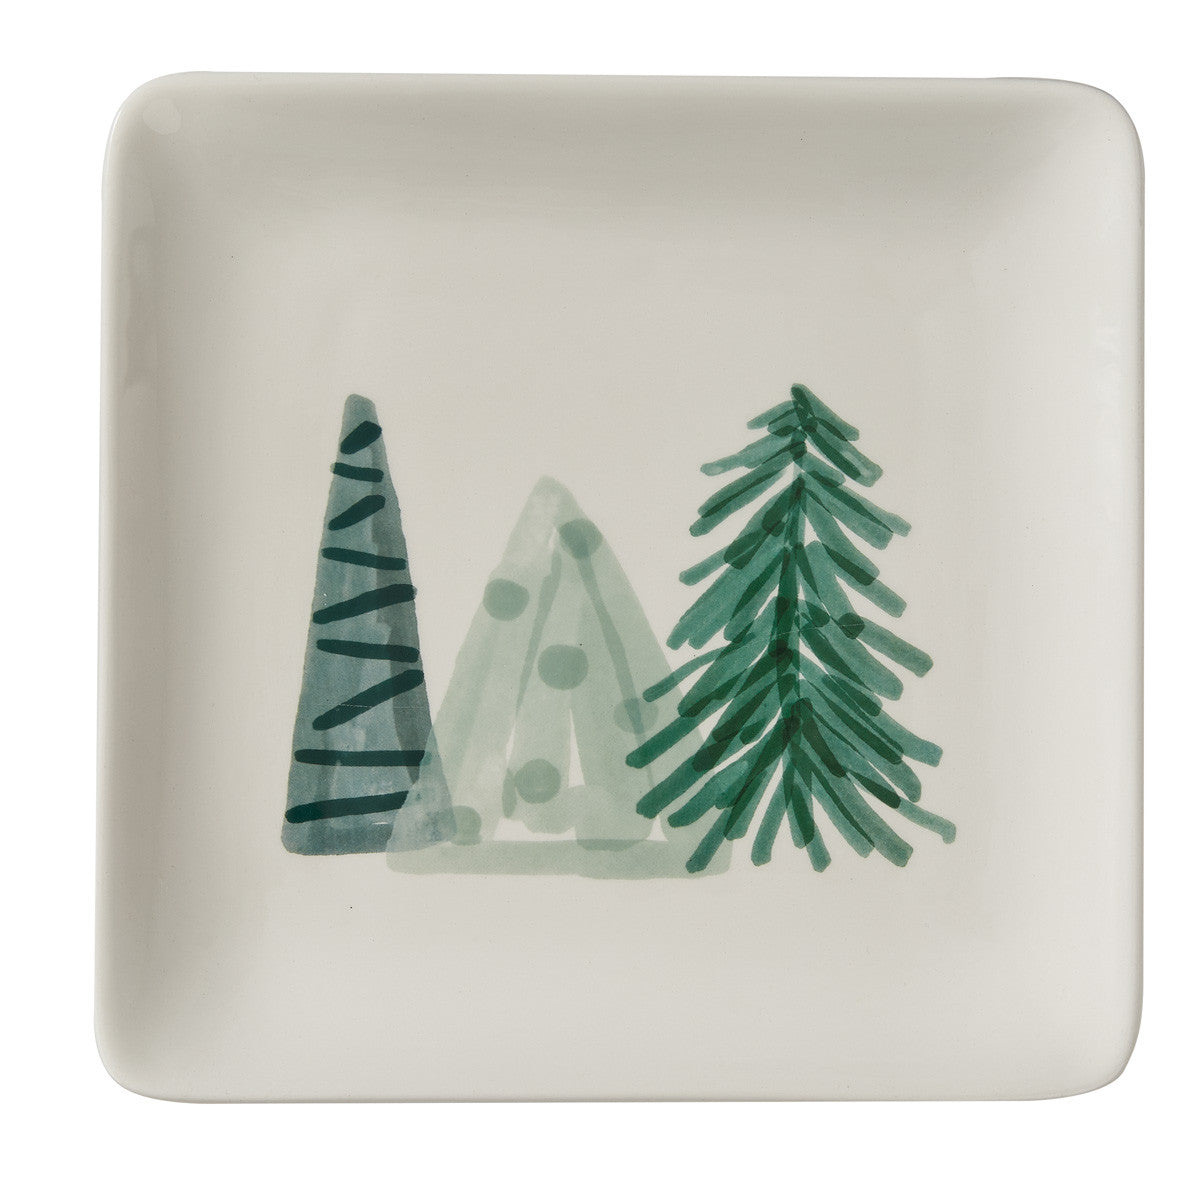 Hand Painted Holiday Salad Plate - Set of 2 Park Designs